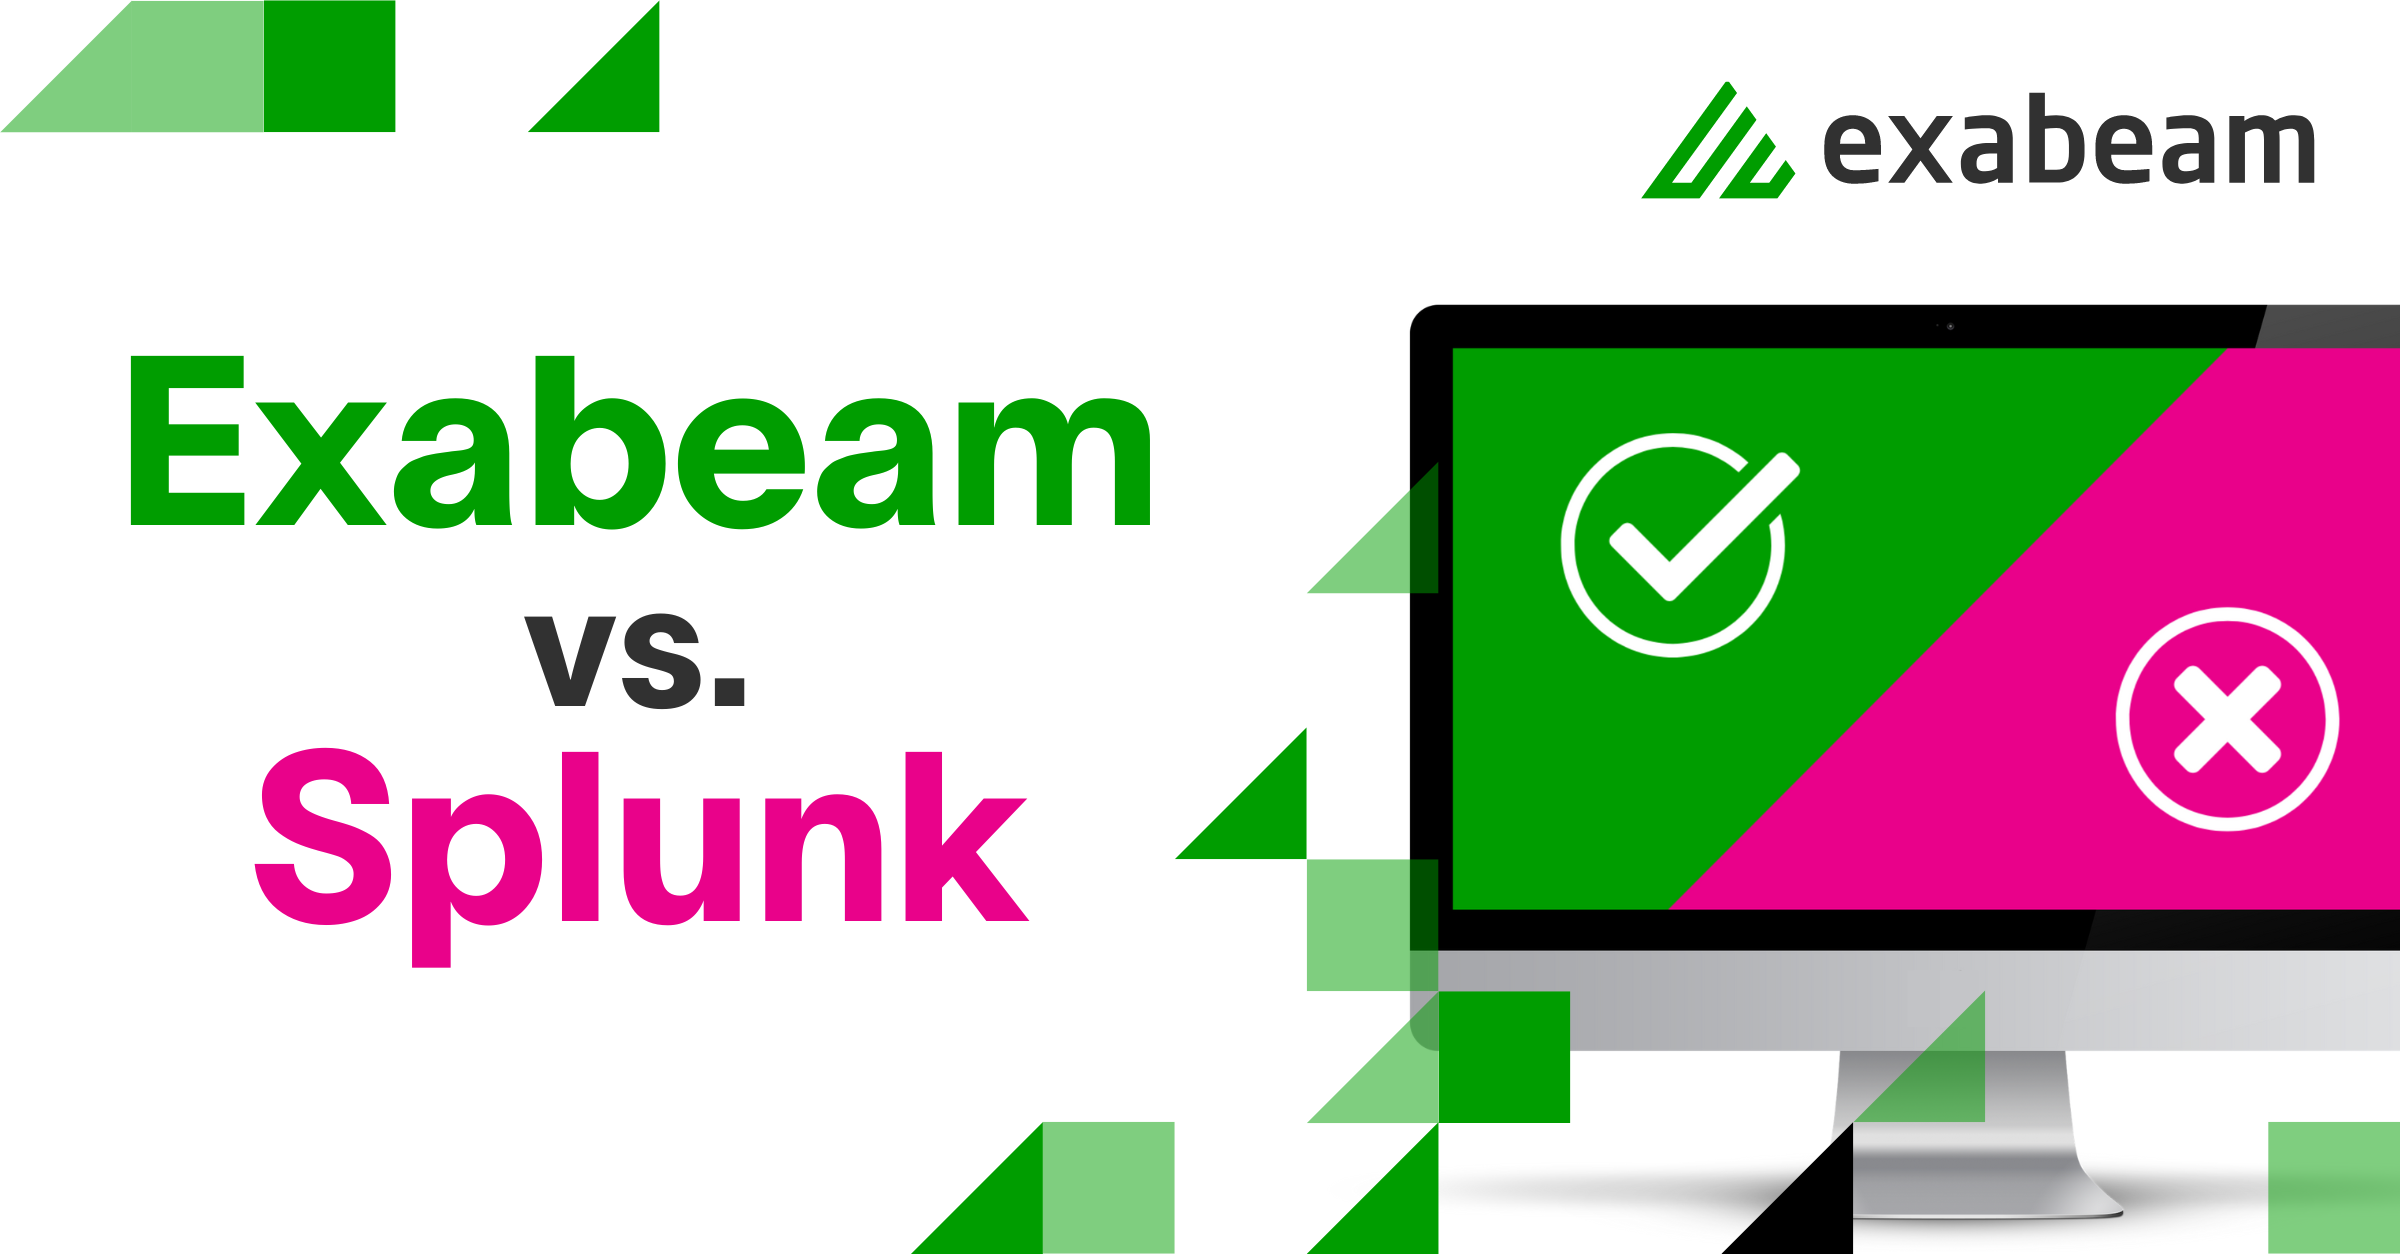 6 Ways Exabeam Delivers Better Security Outcomes Than Splunk